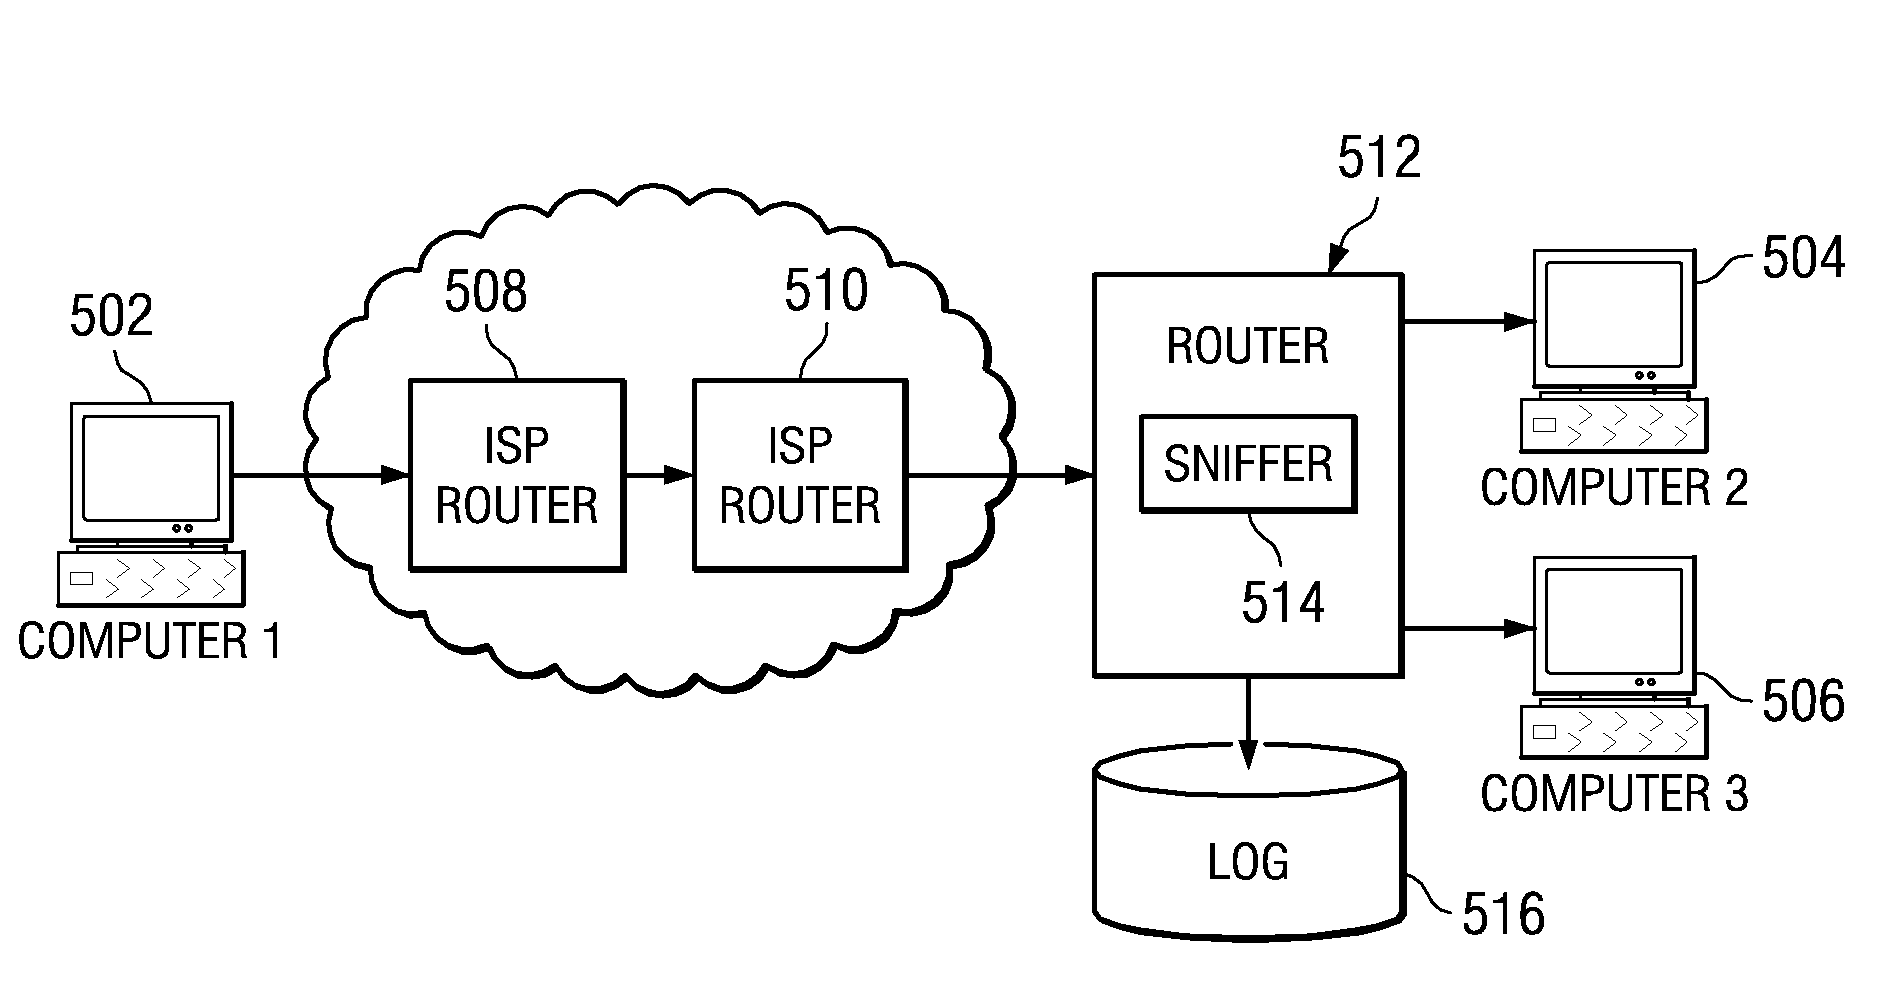 Method for notarizing packet traces